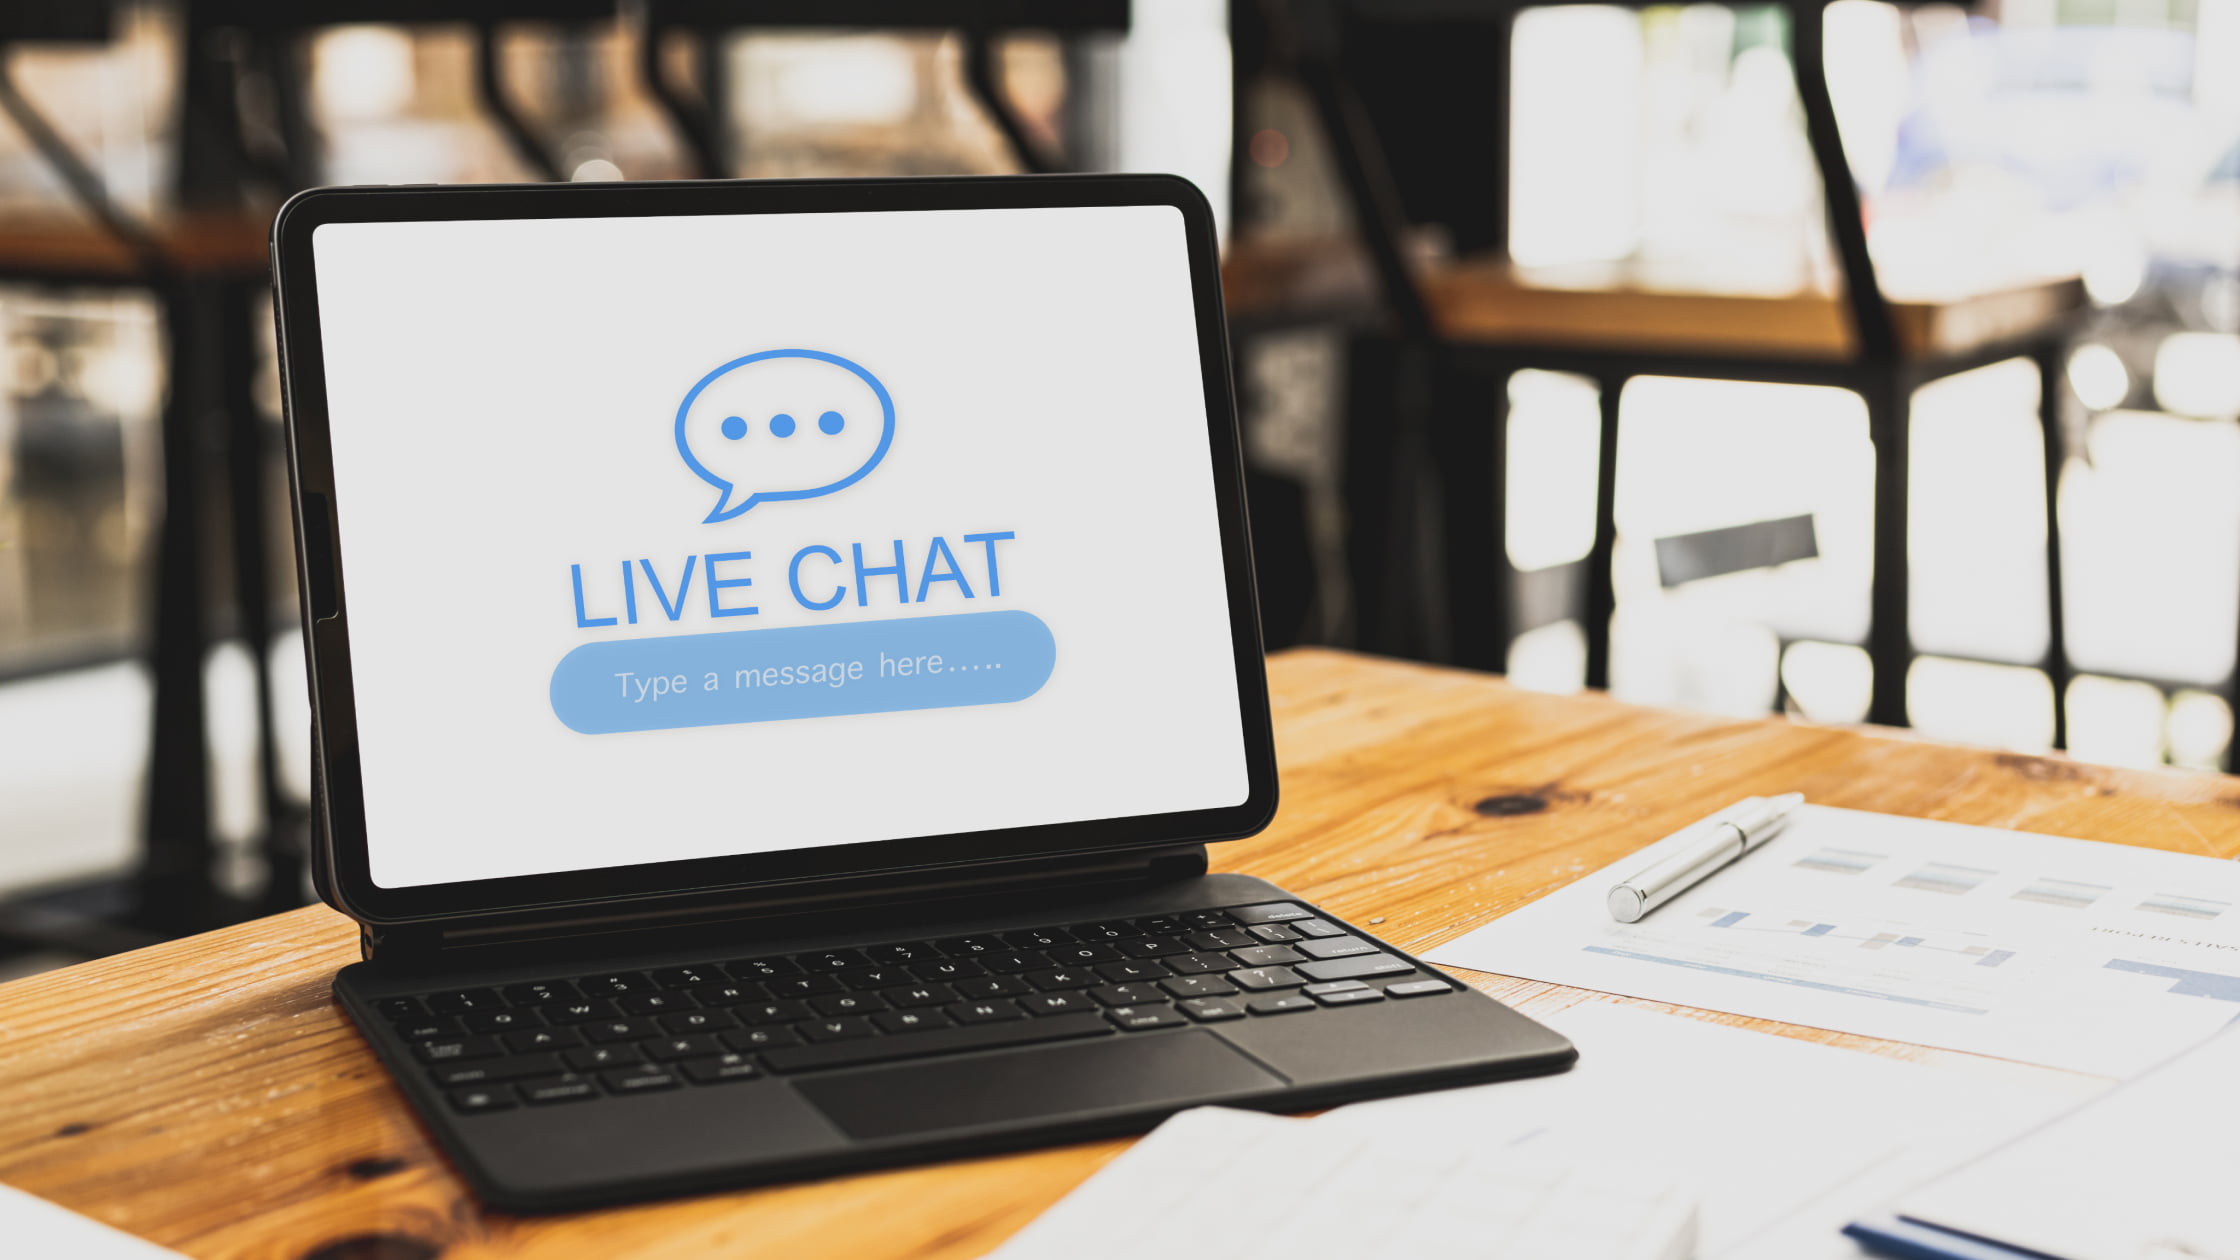 What Are Some Good Online Live Chat Systems for a Website?